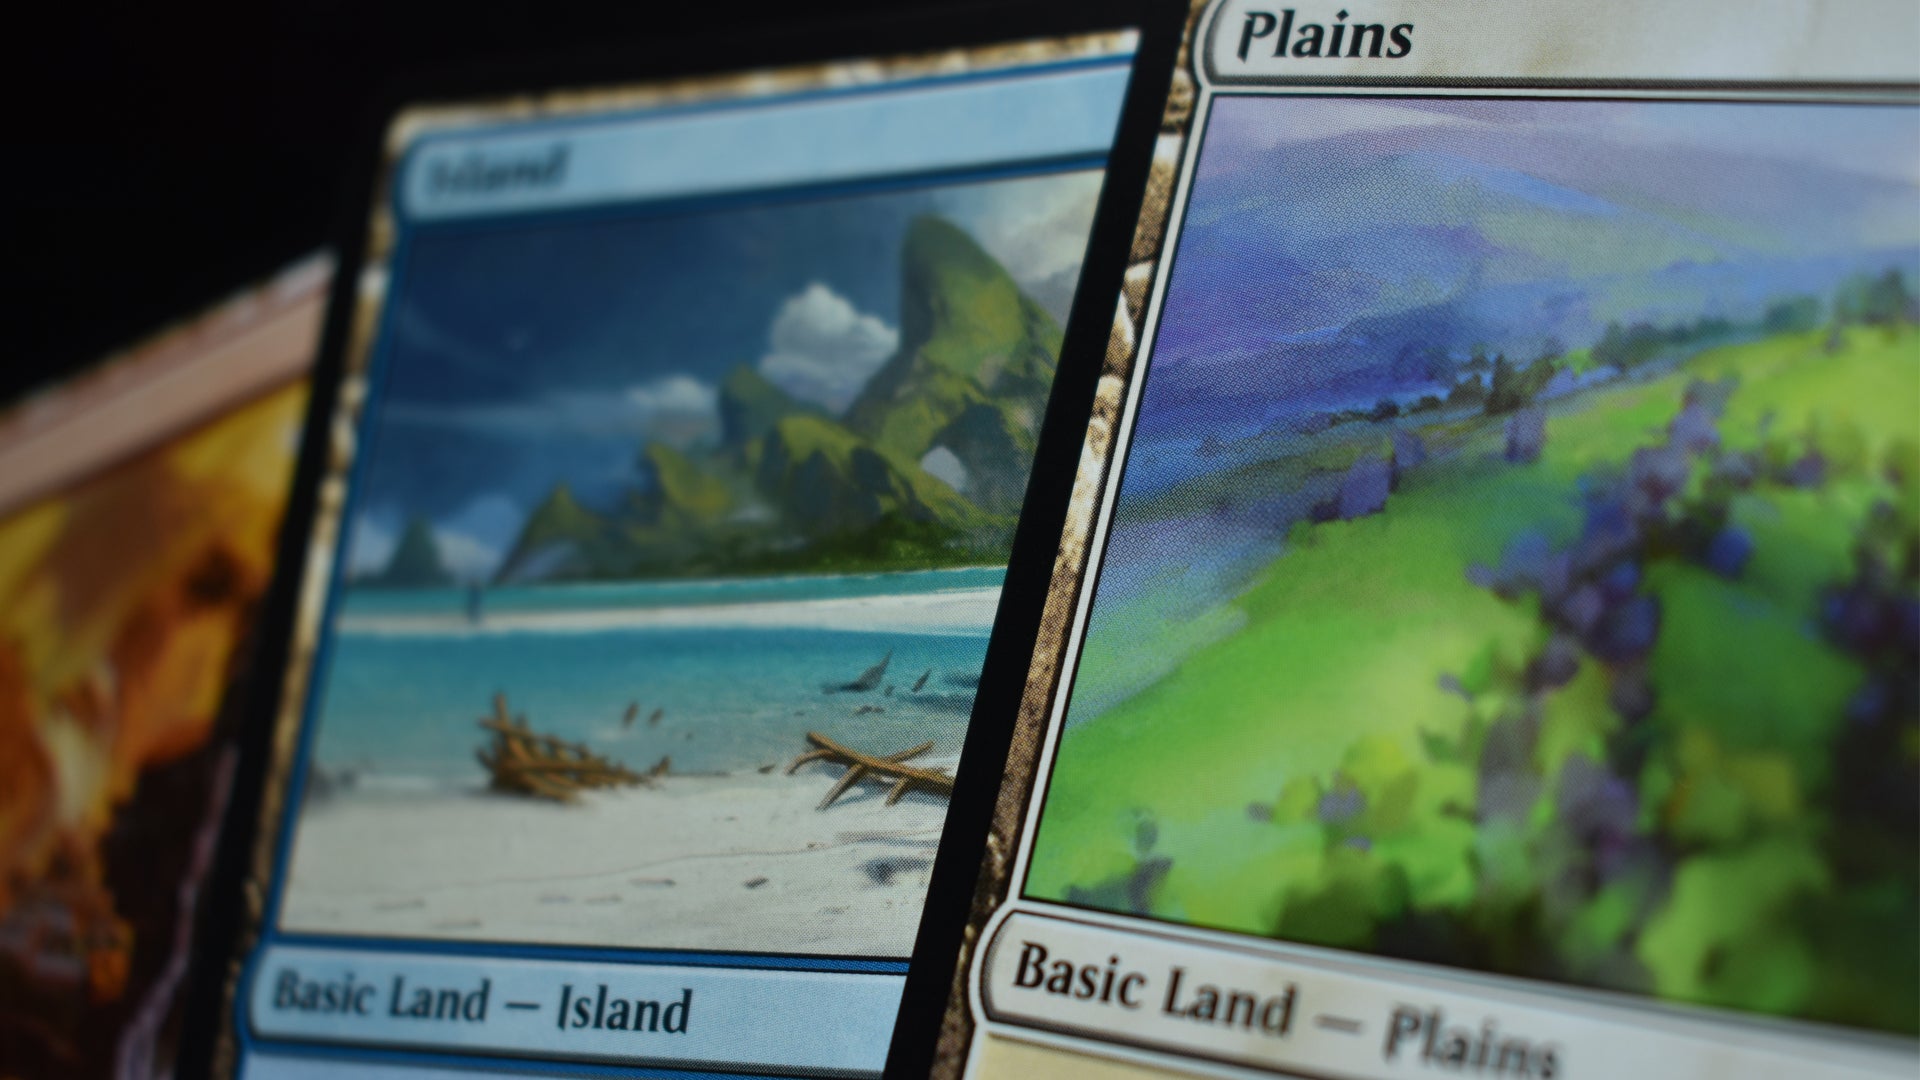 Magic: The Gathering trading card game land cards